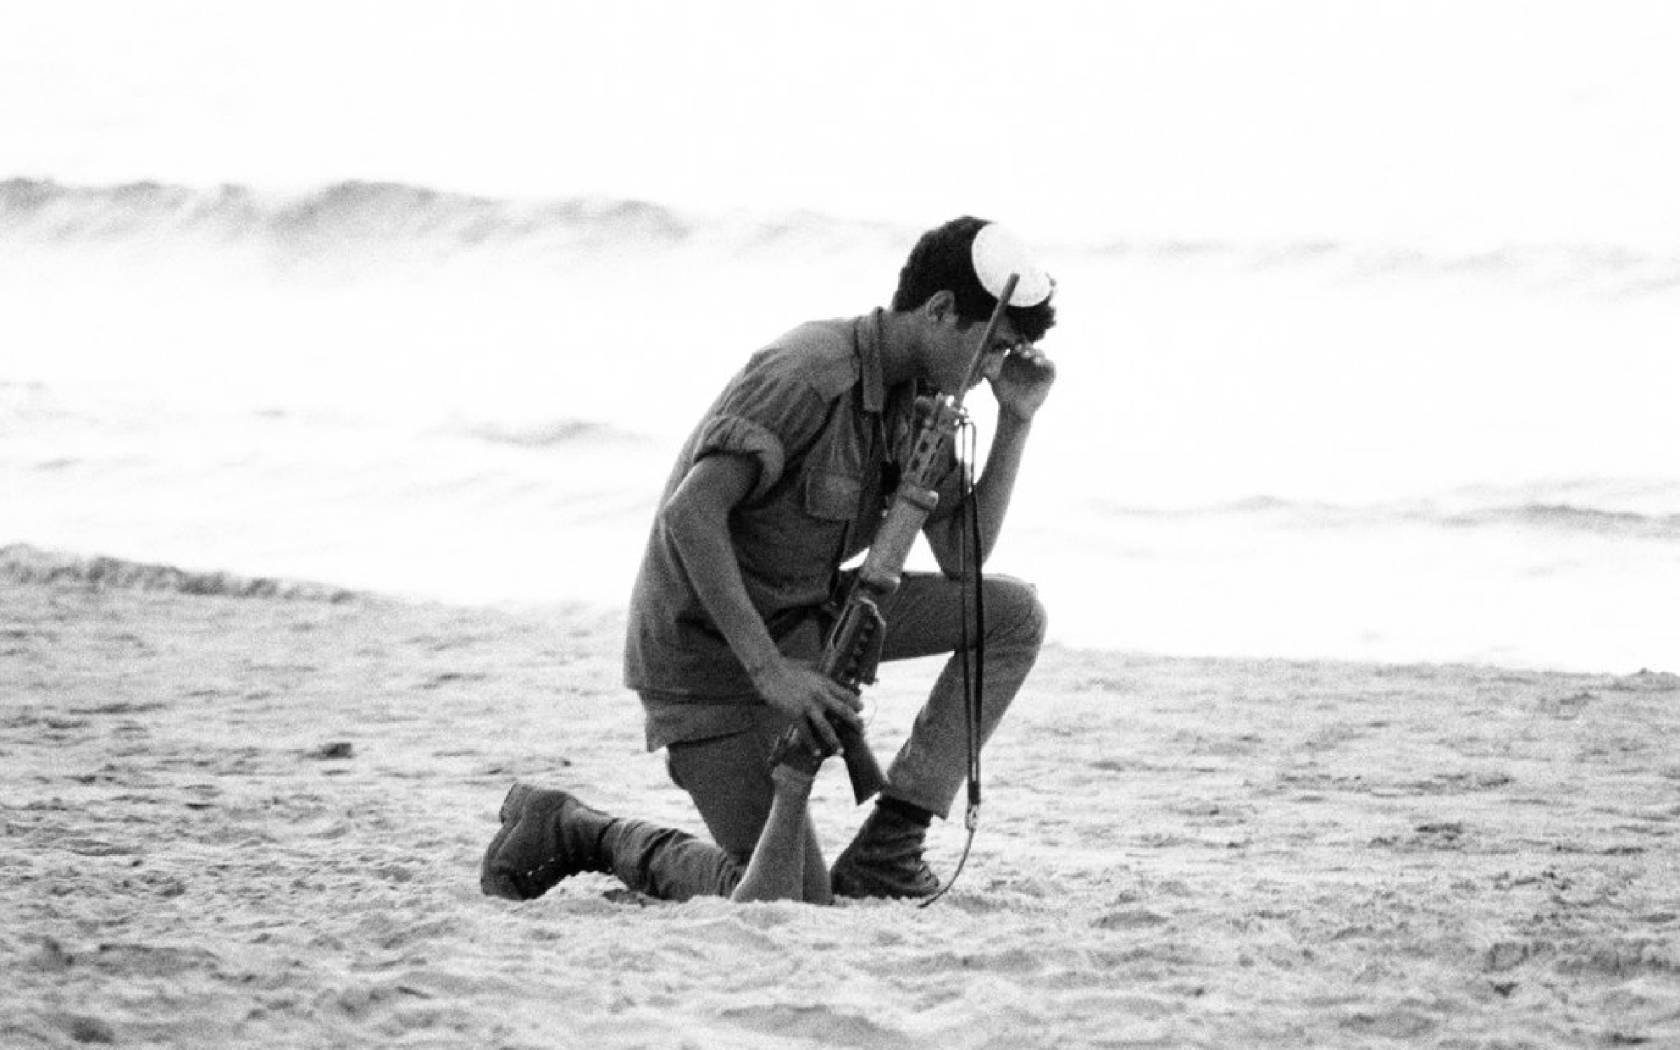 Israeli soldier kneels down to pray in the sand during the Yom Kippur War.